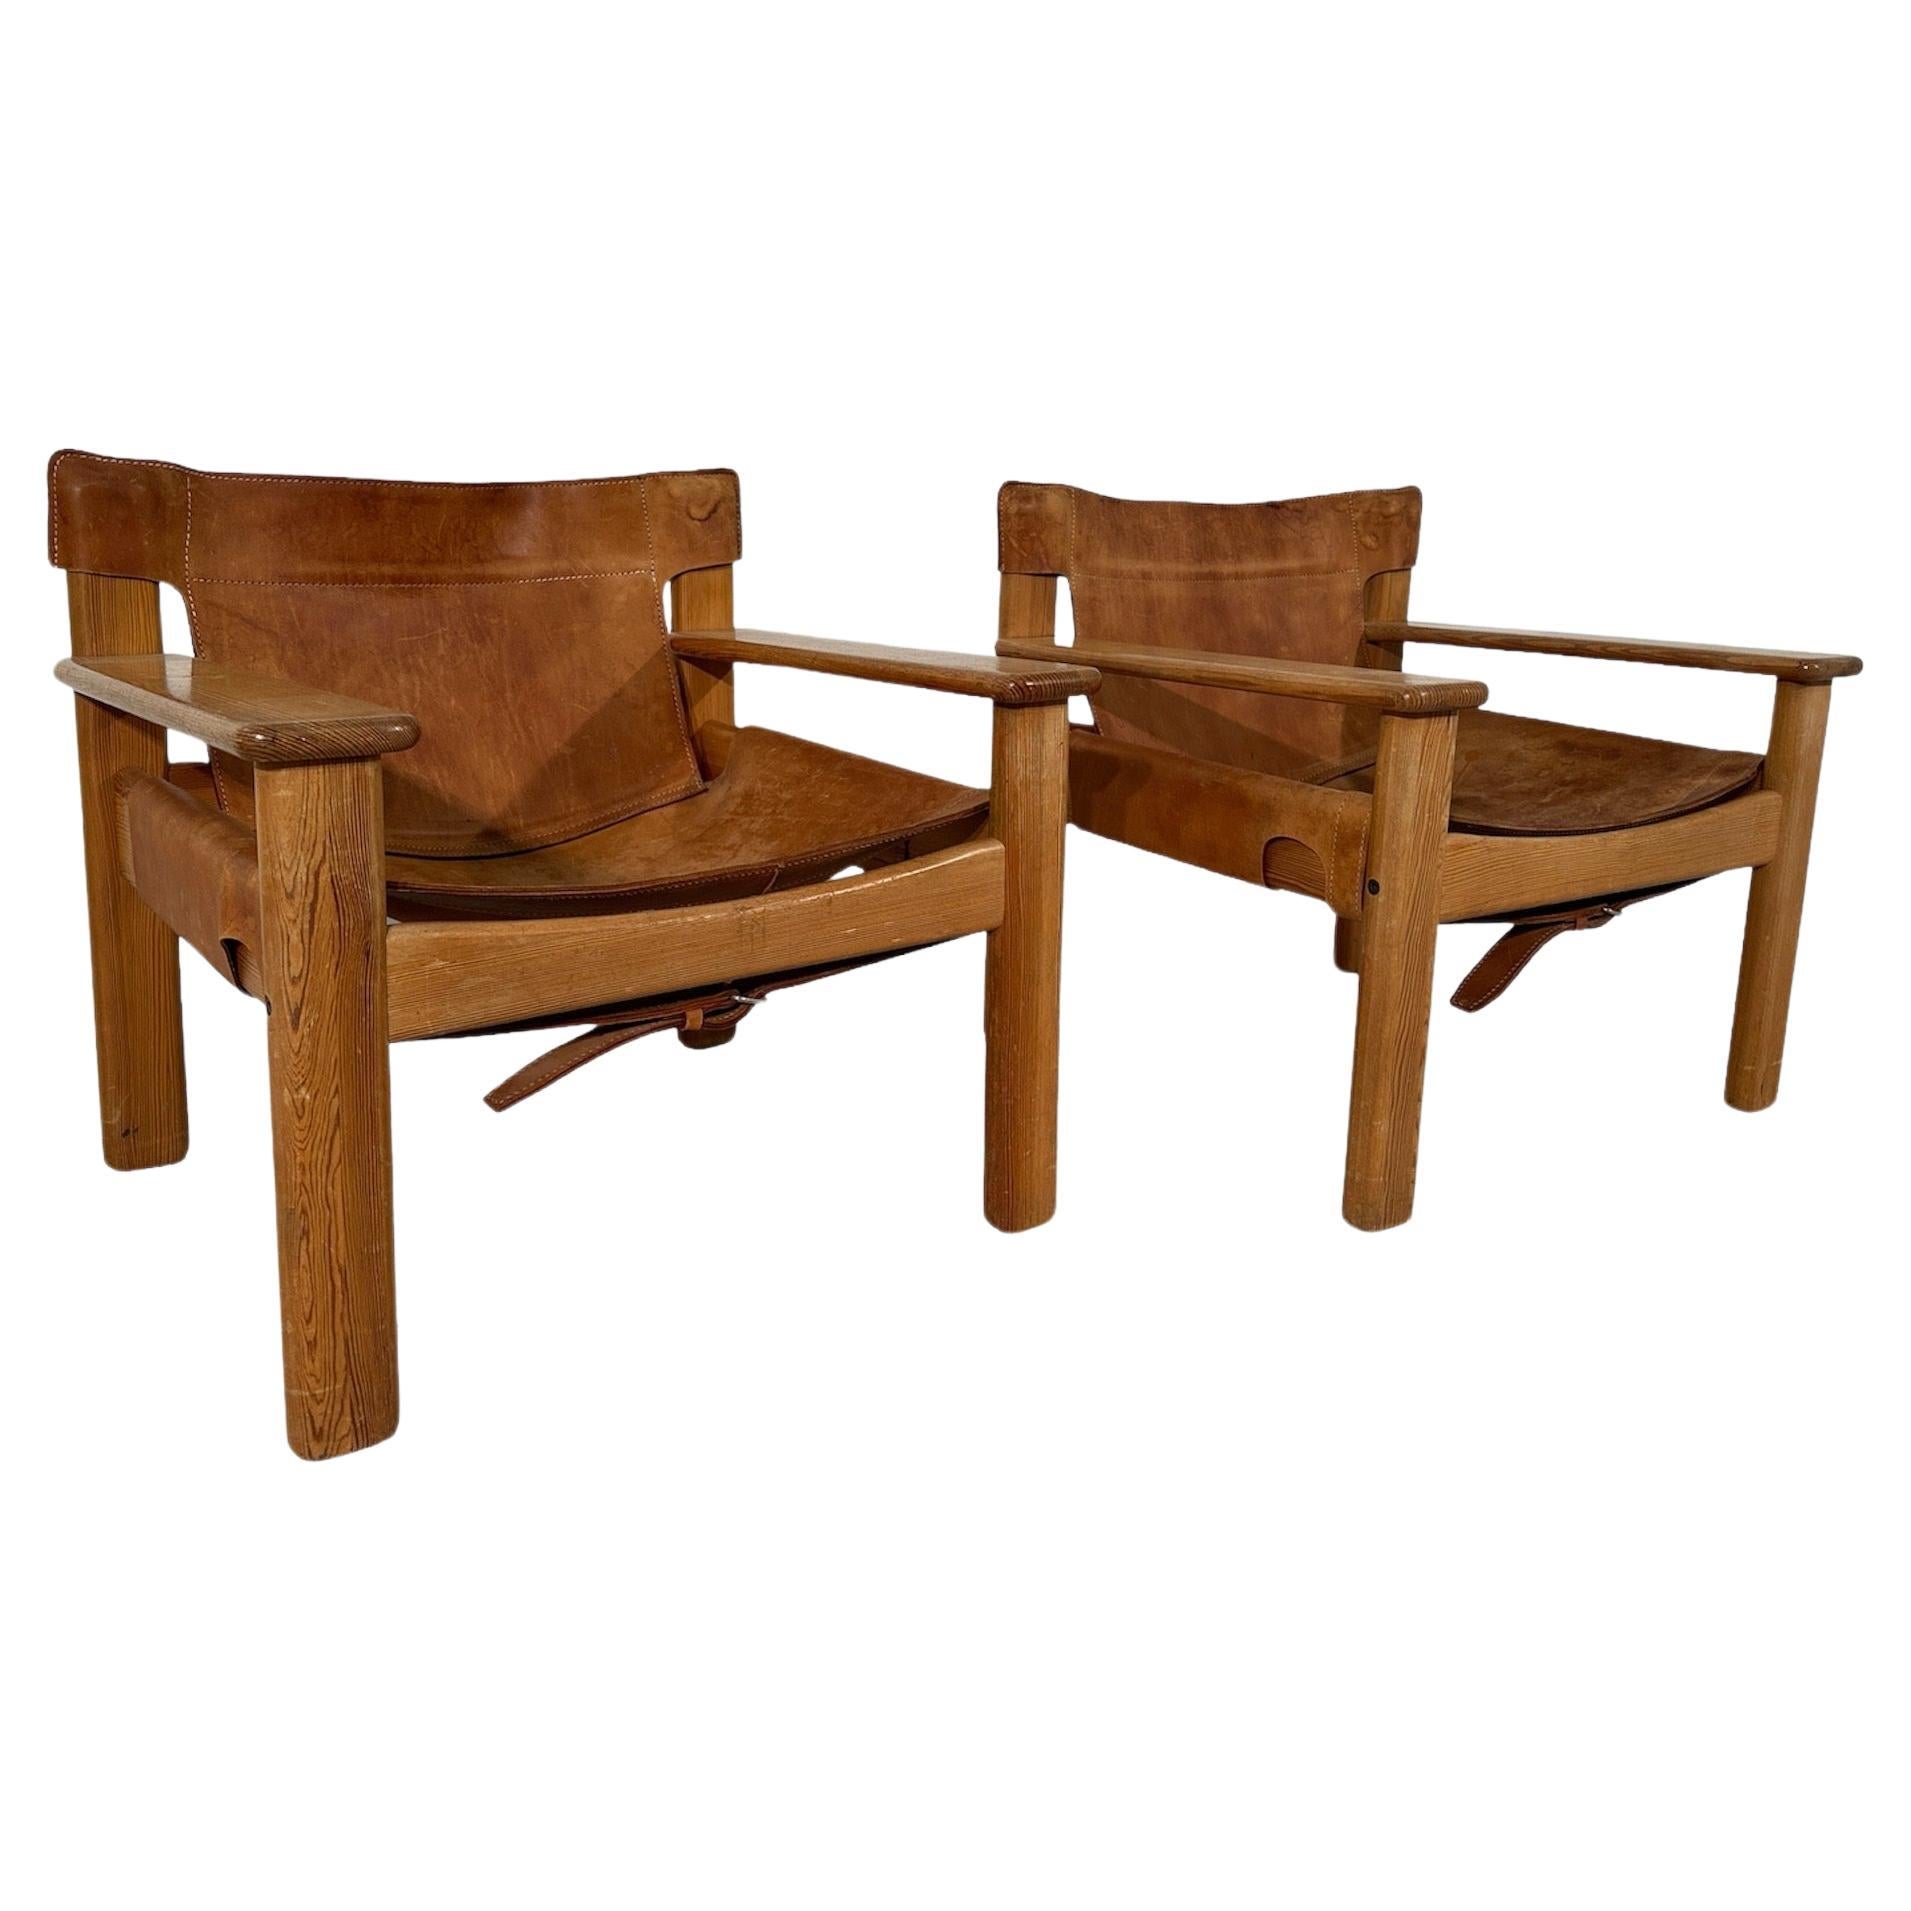 Set of 2 Vintage Italian Wood and Leather Safari Chairs 1970s For Sale